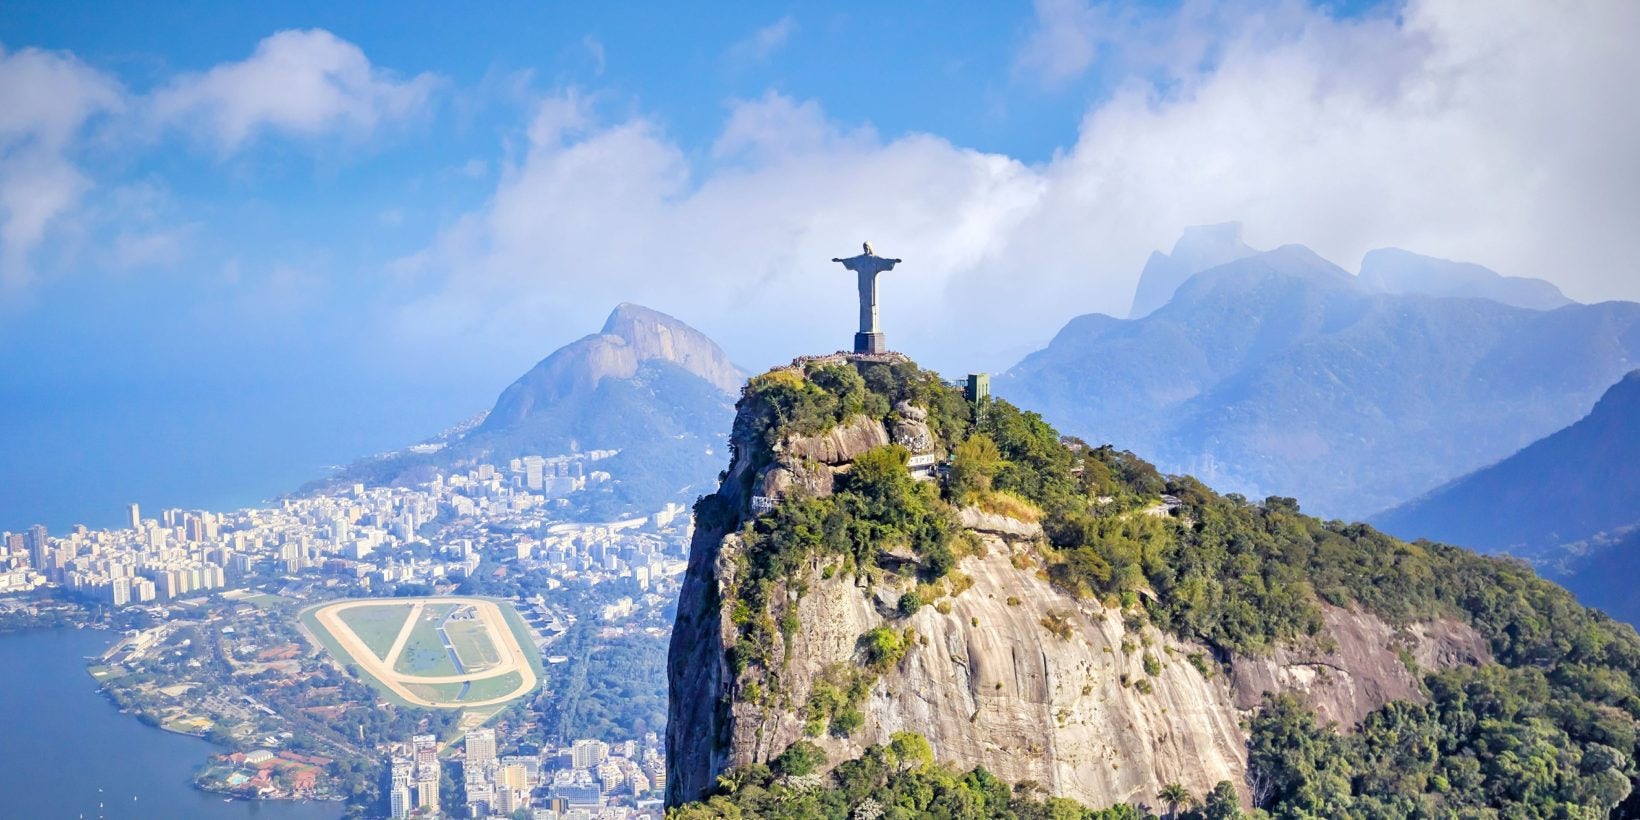 Brazil: Its Strong Growth Potential is Becoming Strategic for Luxury